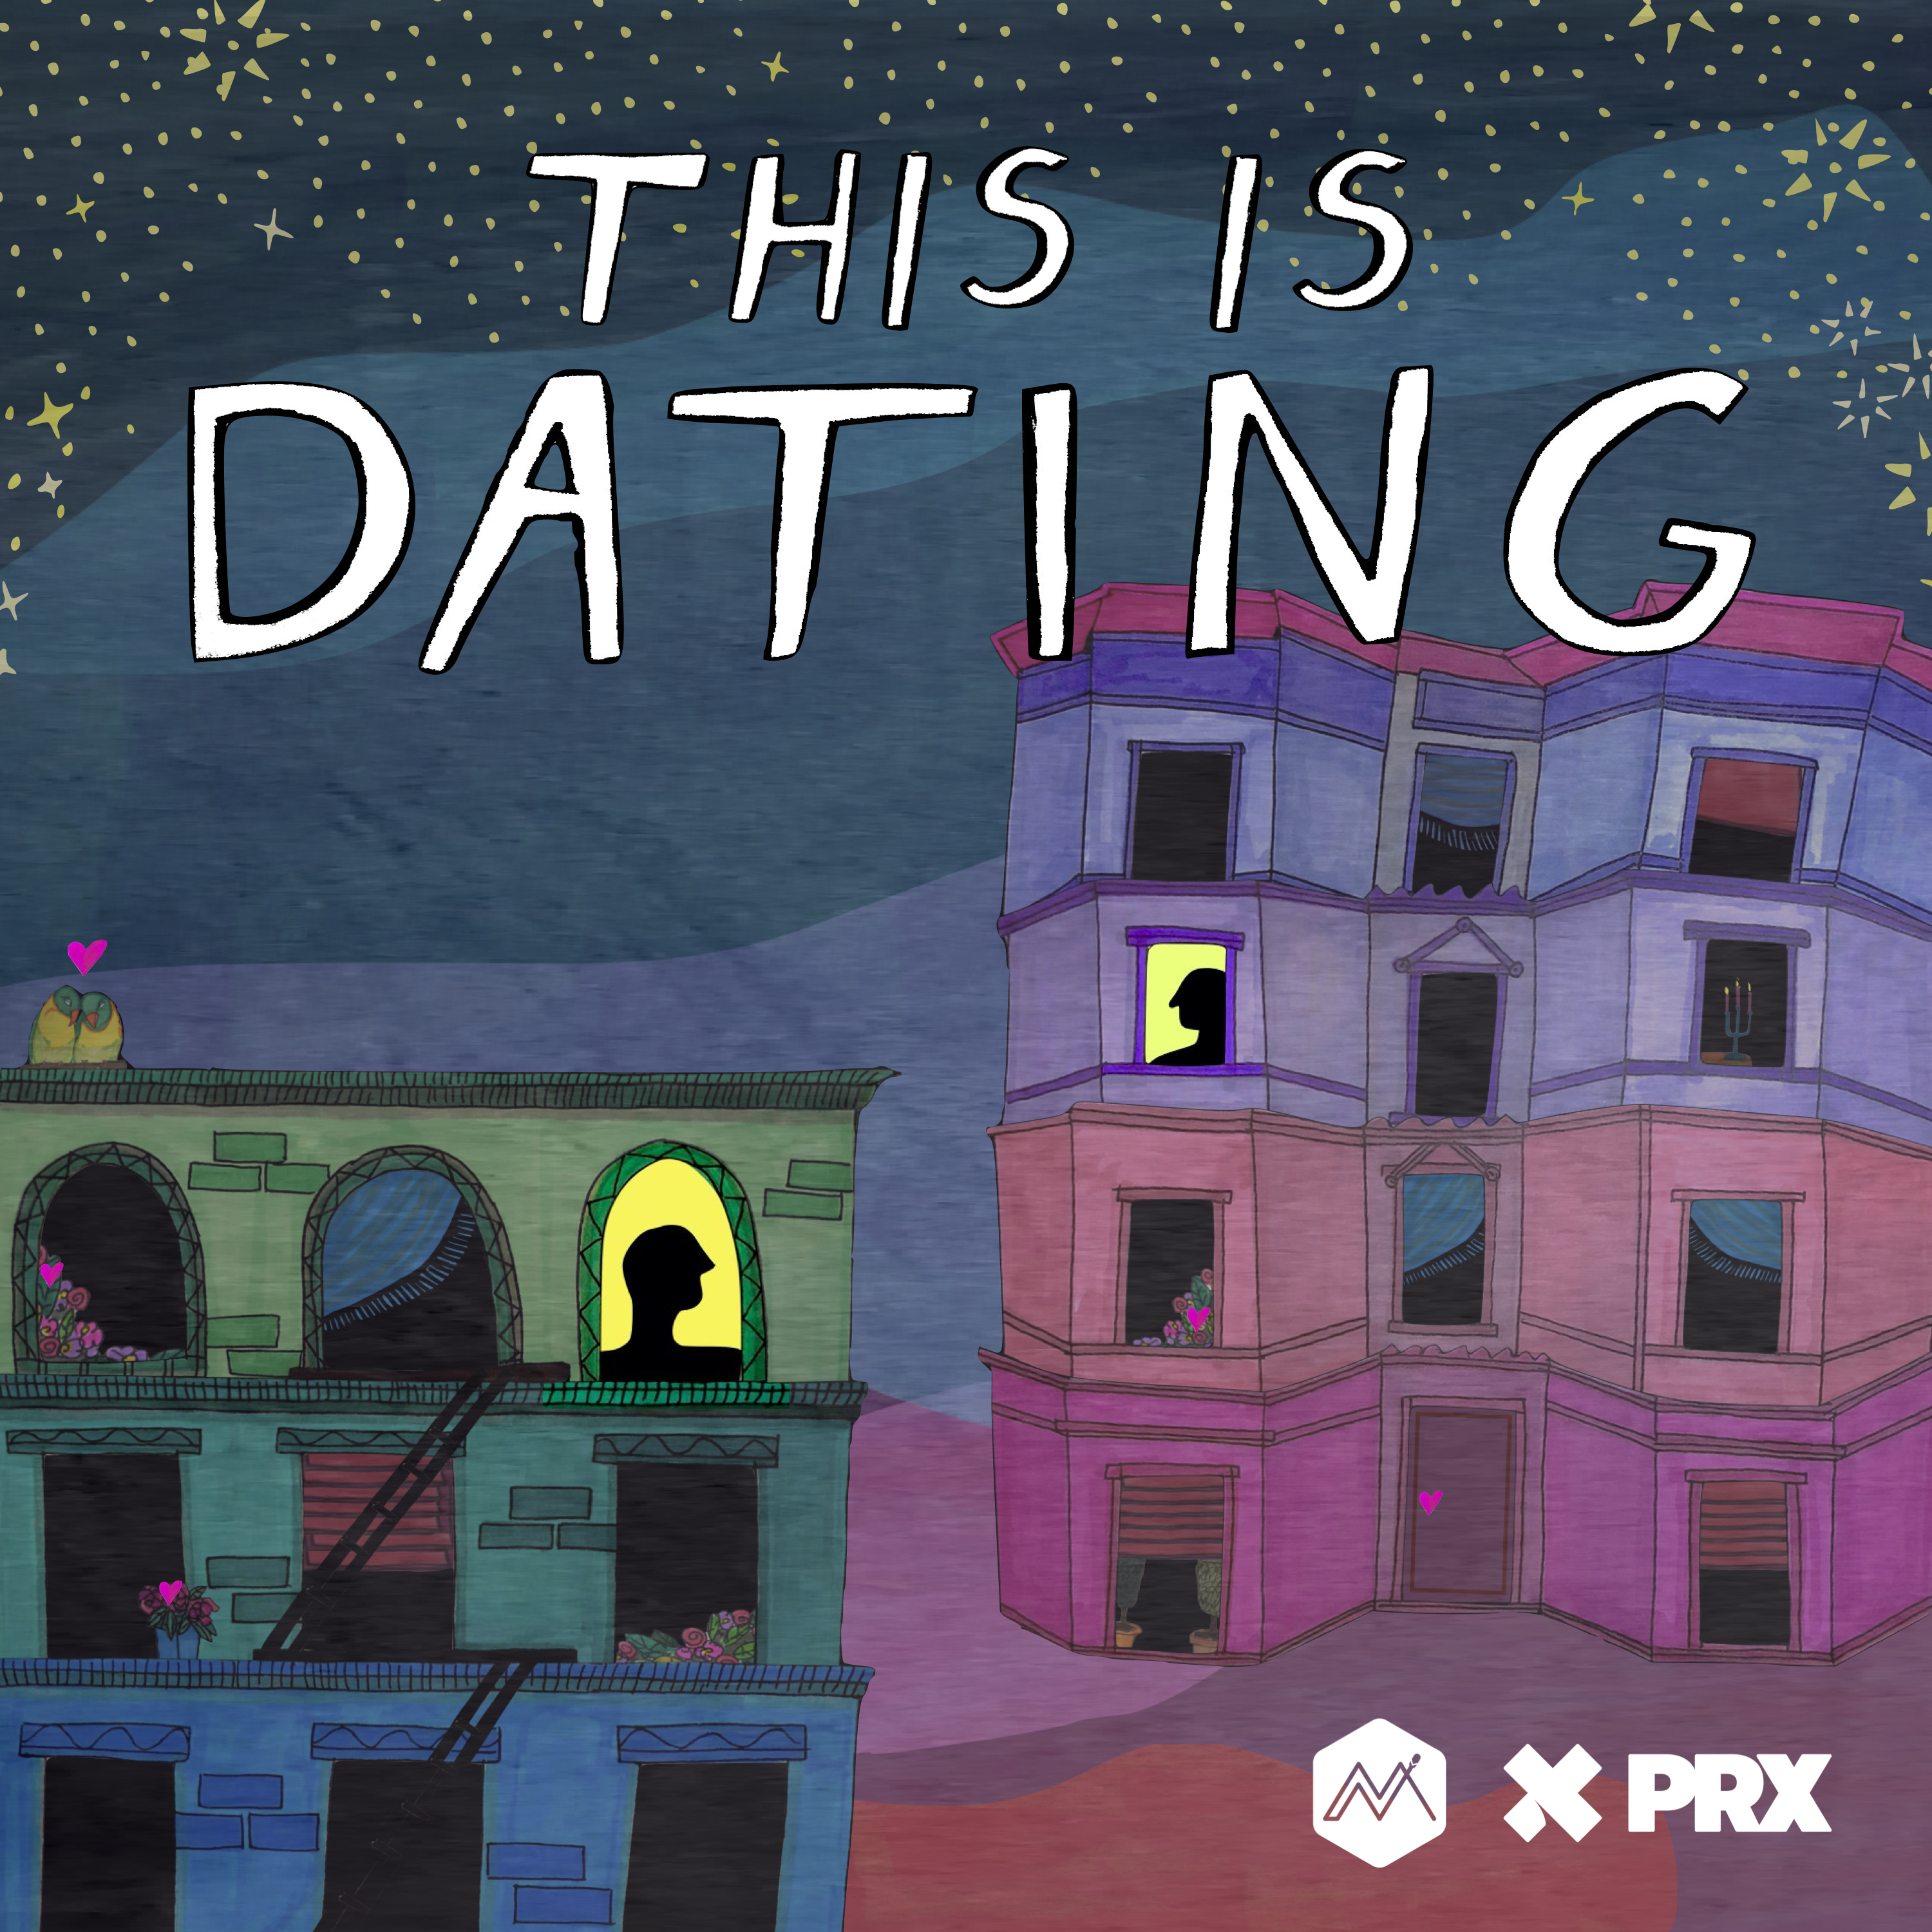 Thumbnail for "Introducing: This Is Dating".